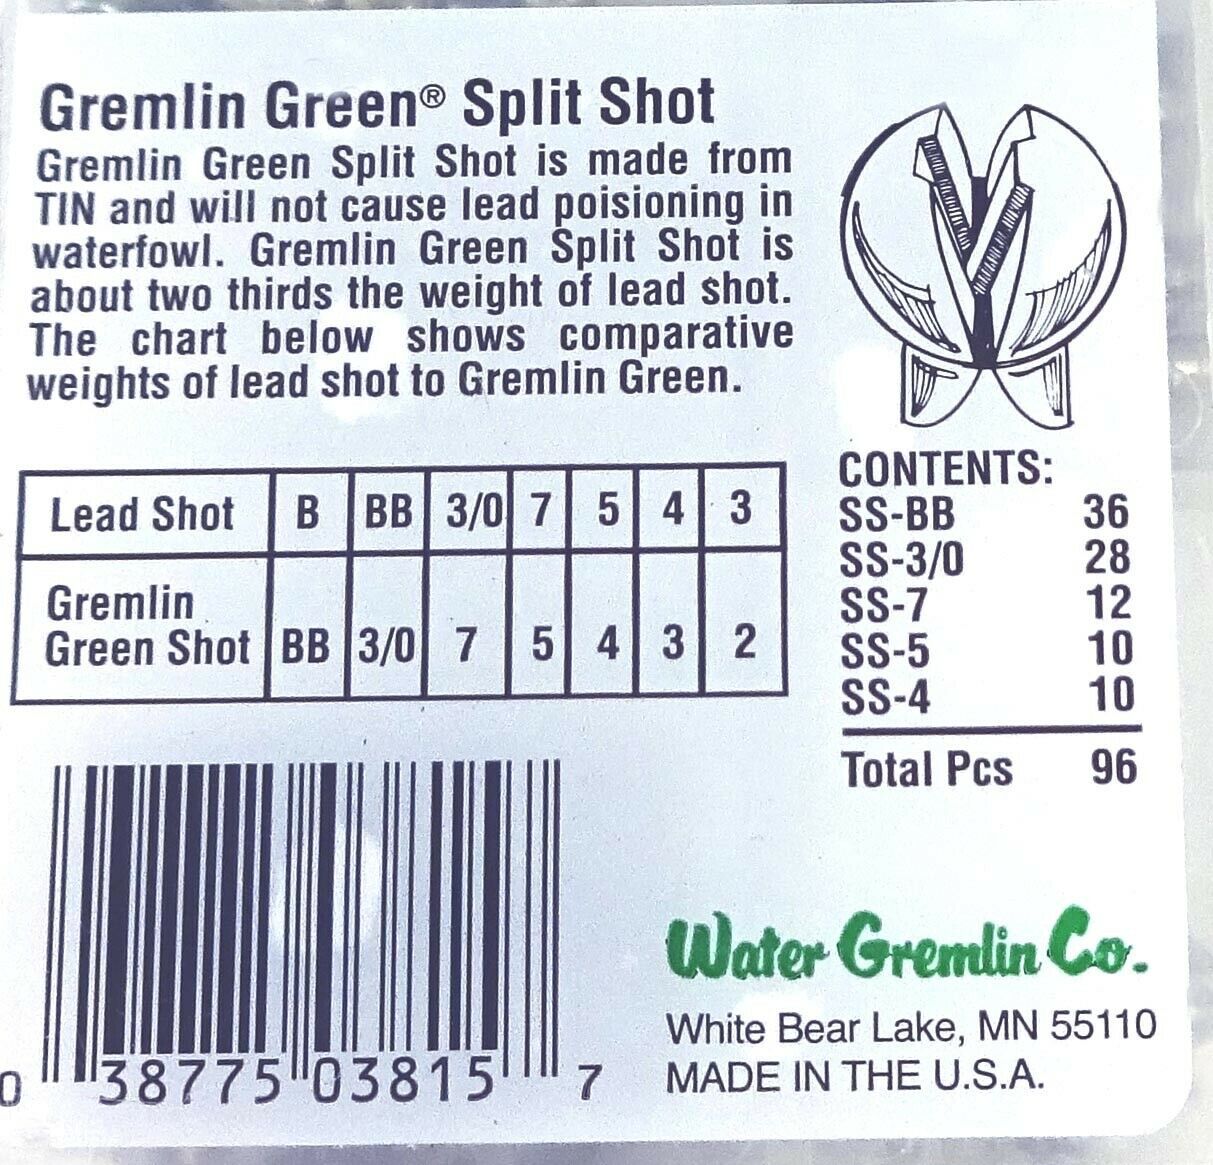 Water Gremlin's Green/Tin Removable Split Shot Pro Pack, #zss Pro, 96 Pieces